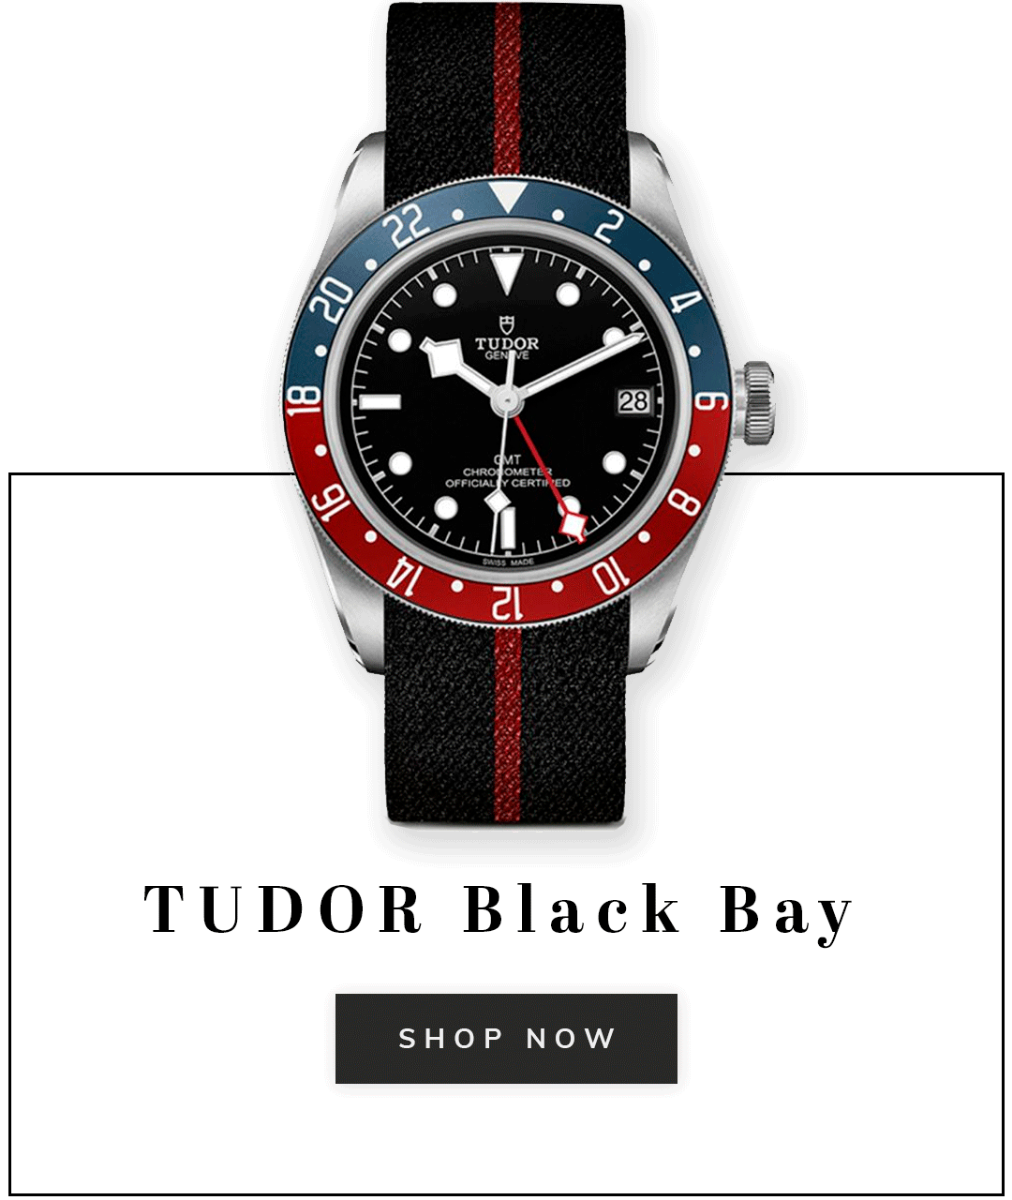 A Tudor black bay watch with text shop now